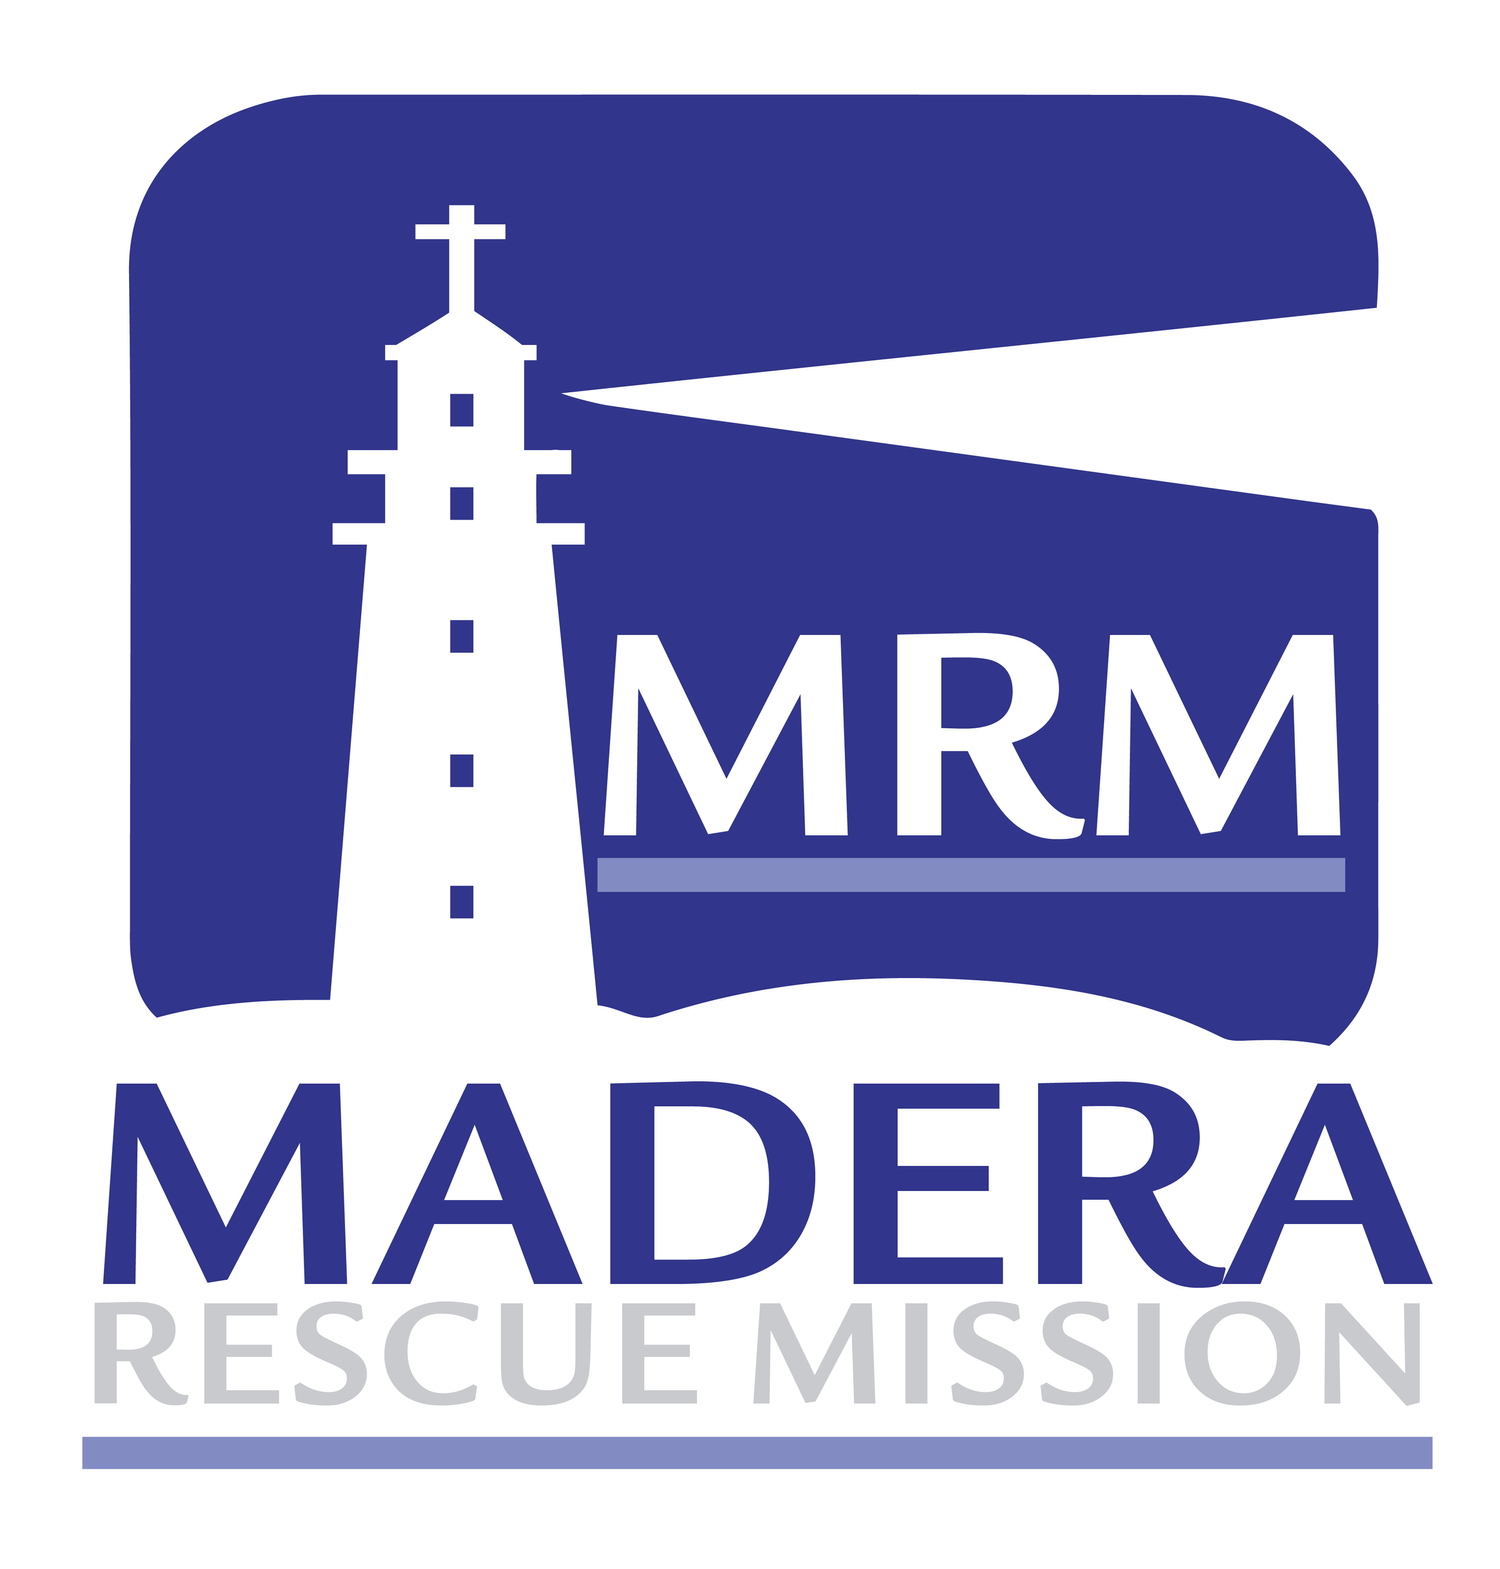 Madera Rescue Mission